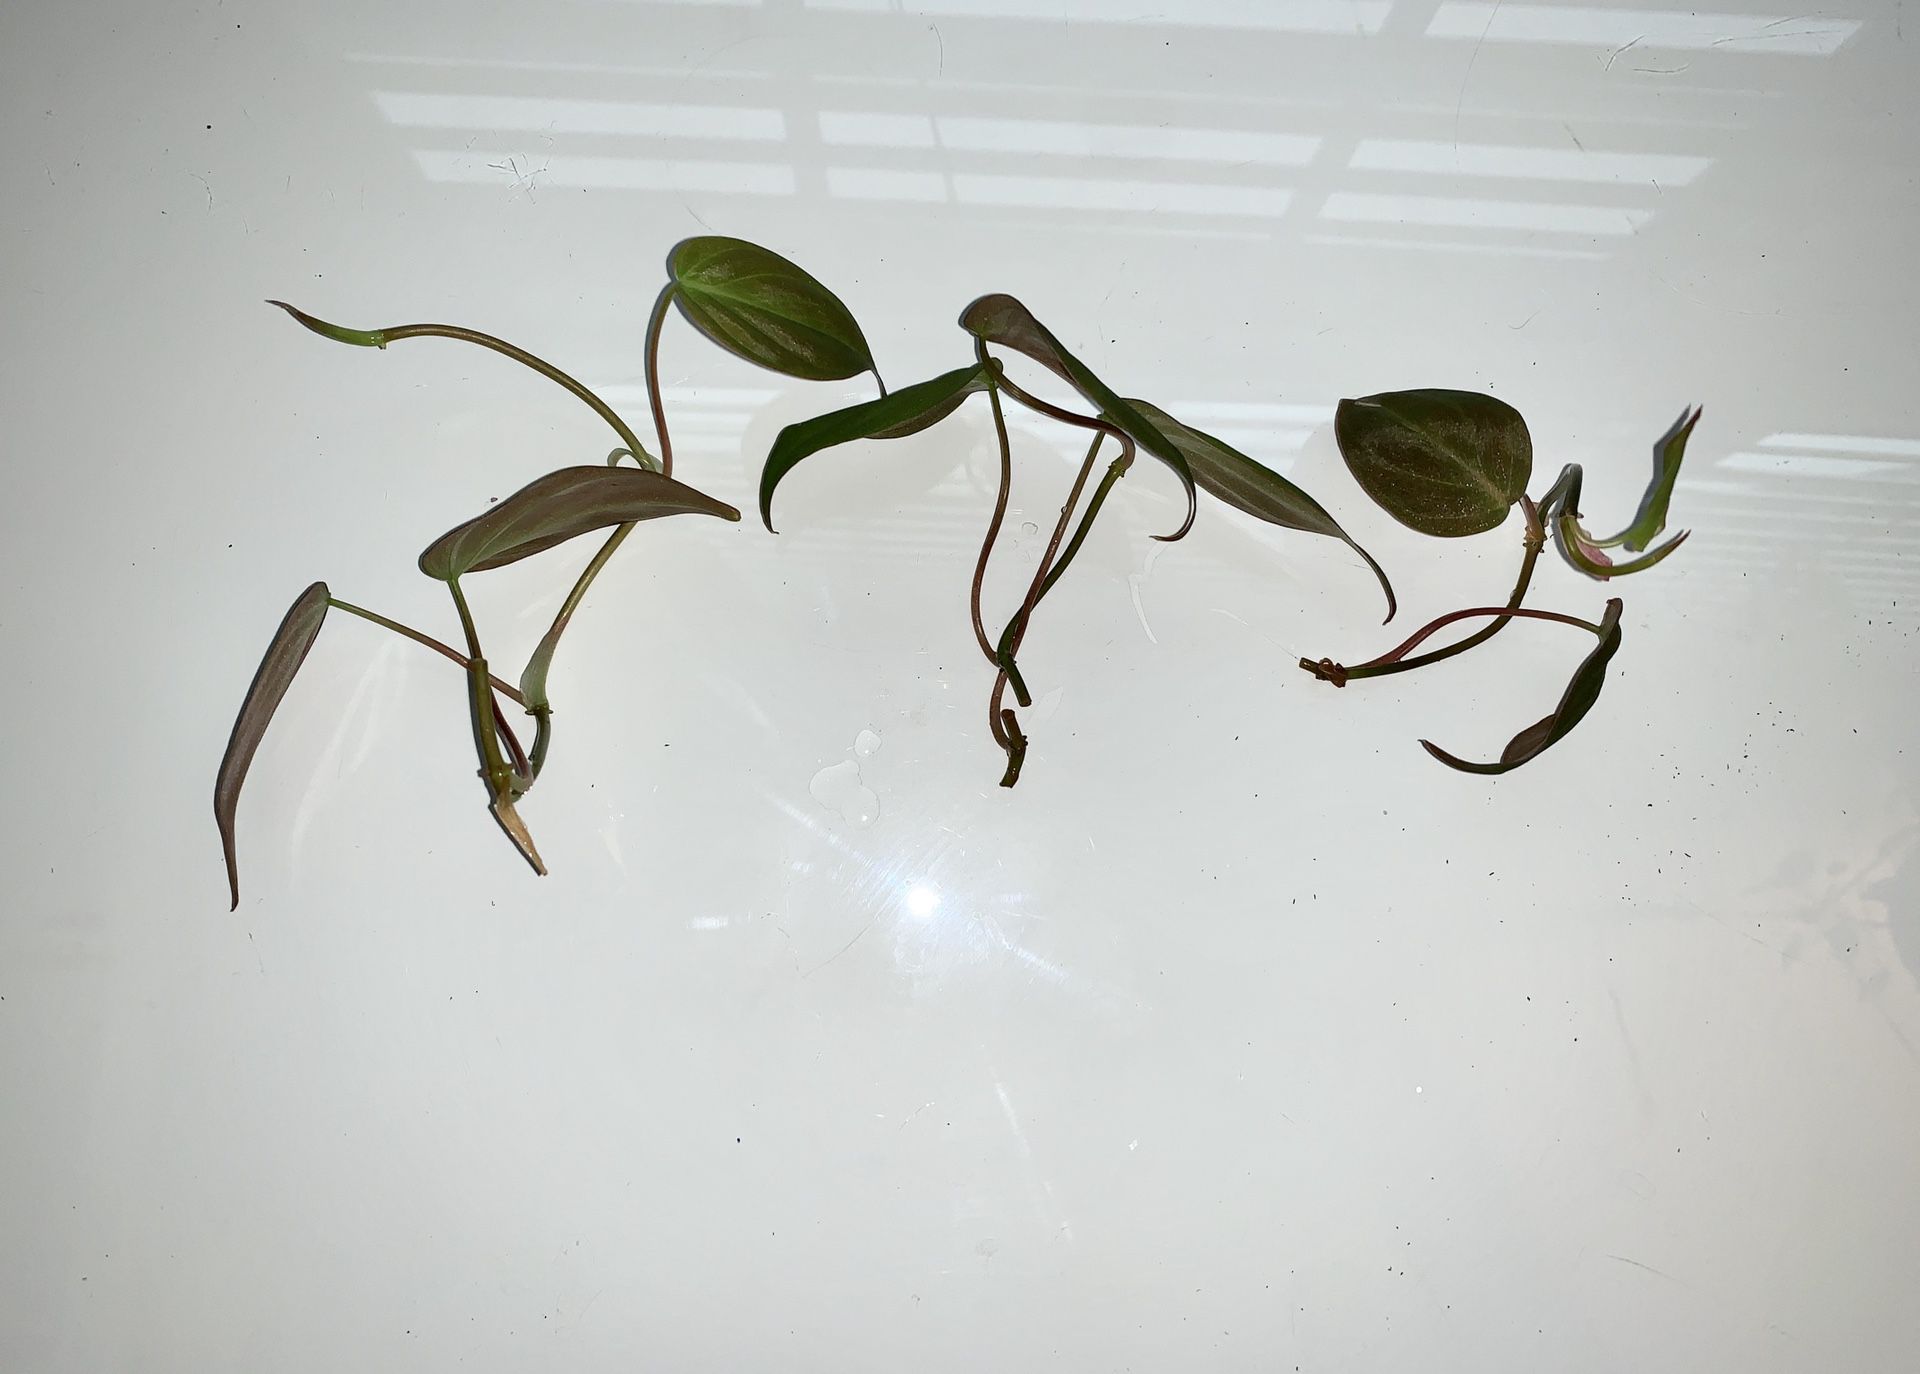 Philodendron micans unrooted cutting